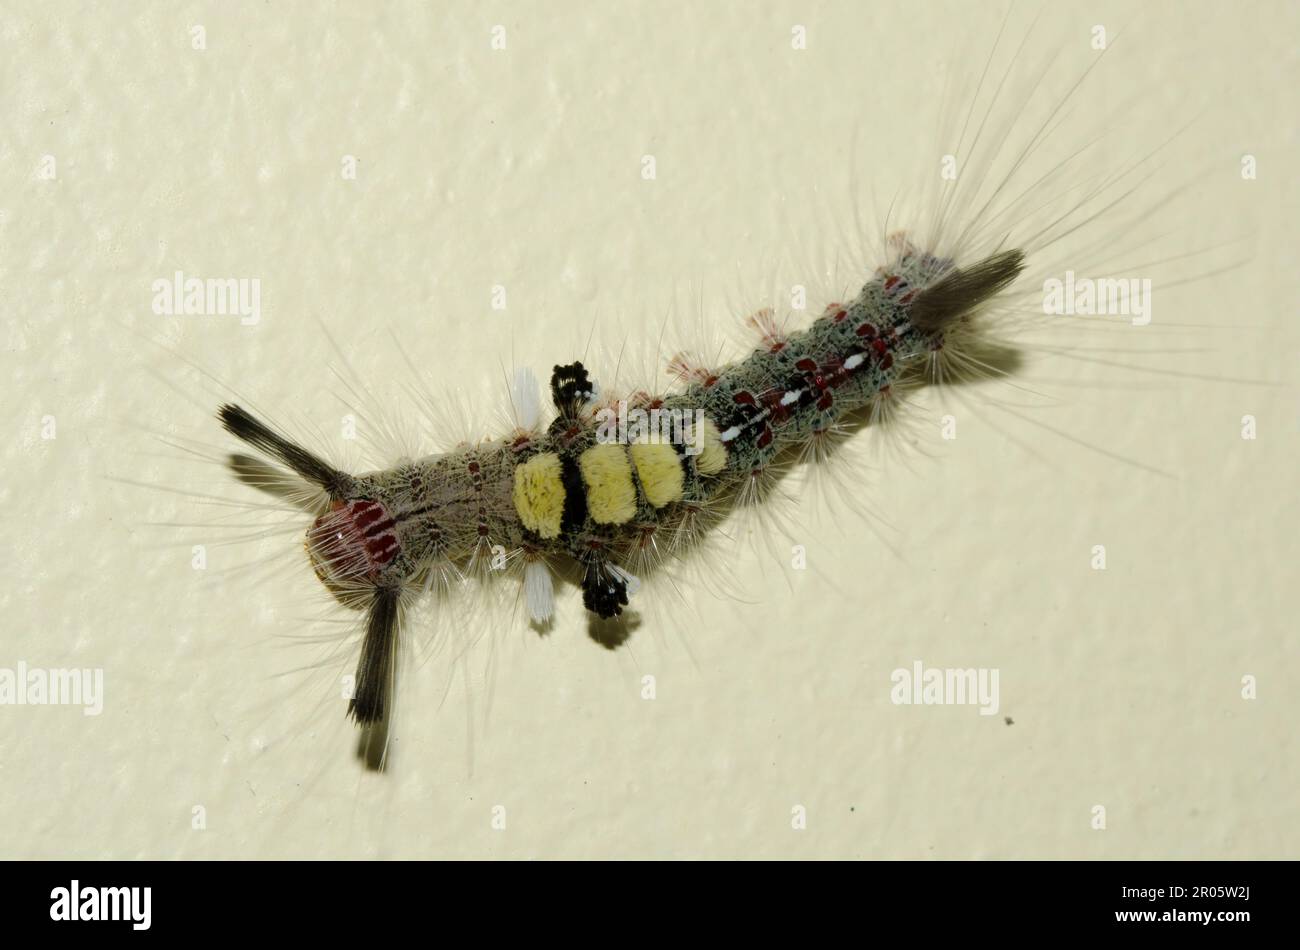 Tussock Moth Caterpillar, Lymantriidae Family, with long hairs for protection on wall, Klungkung, Bali, Indonesia Stock Photo